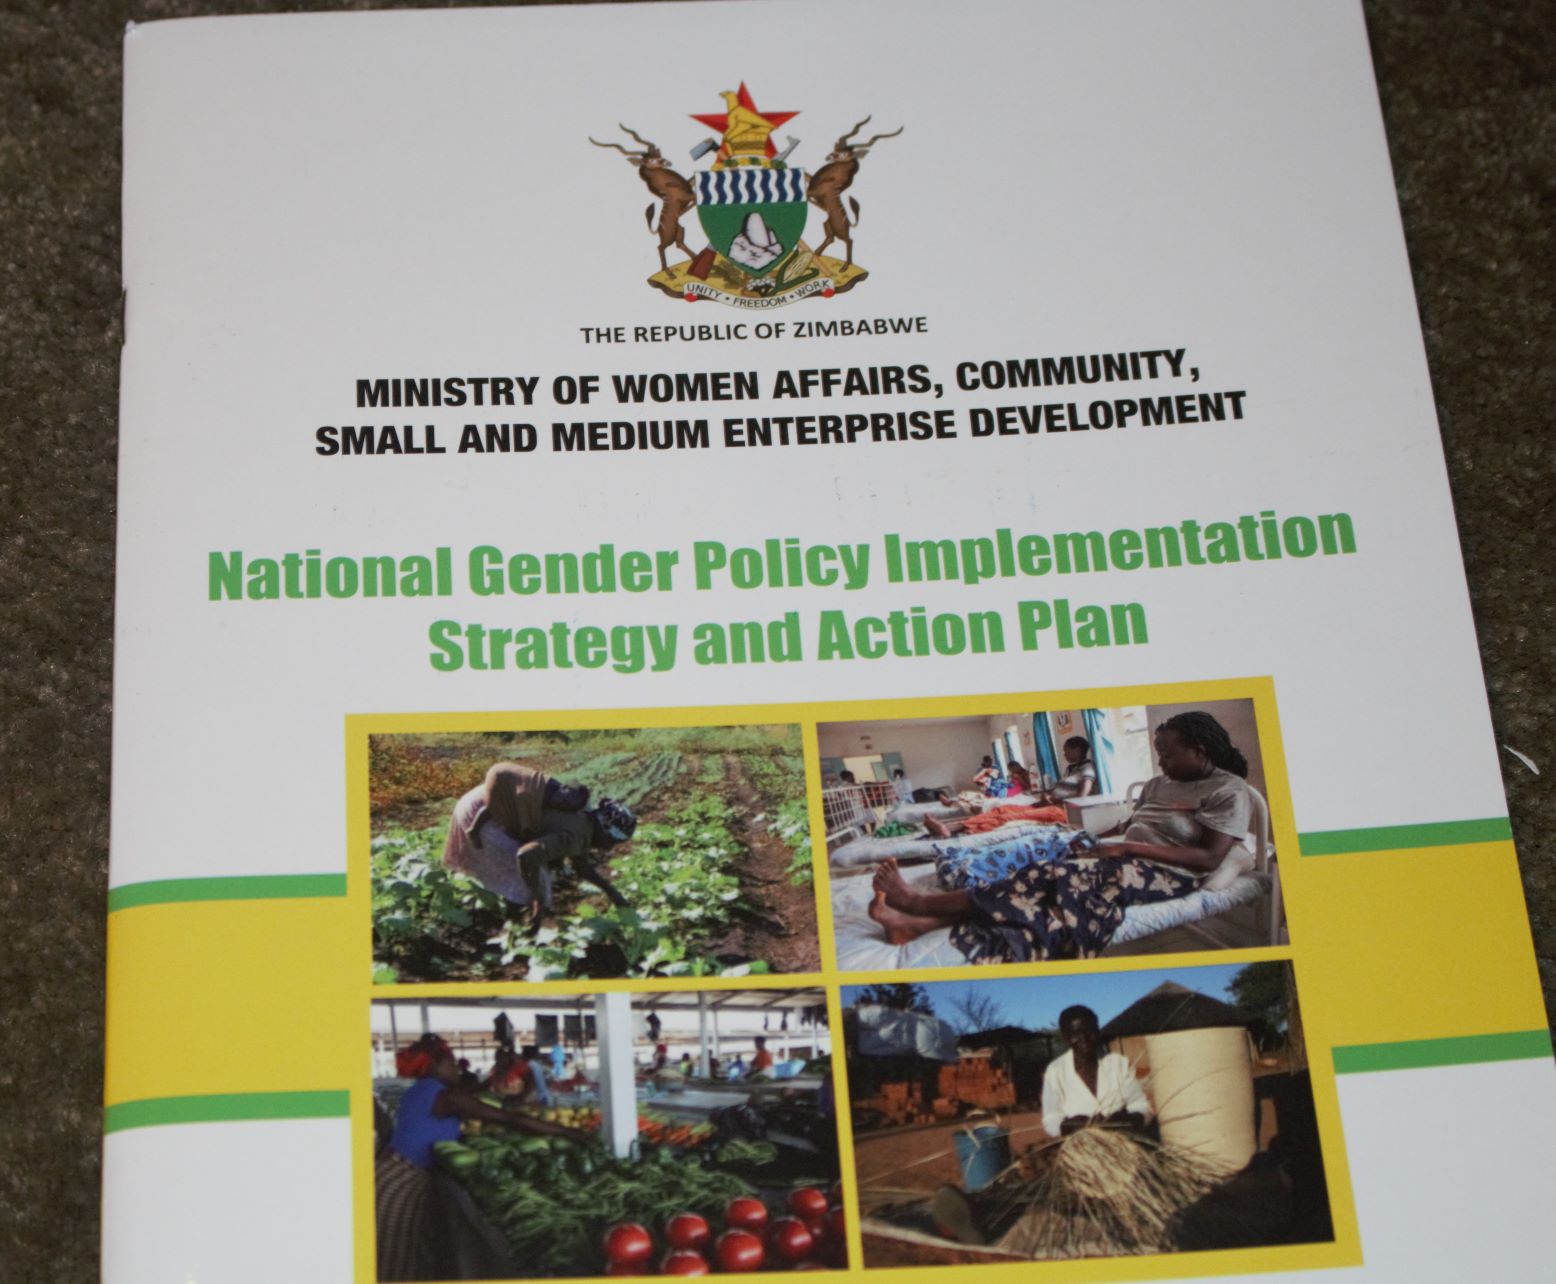 The National Gender Policy Implementation Strategy and Action Plan                                                                                                              